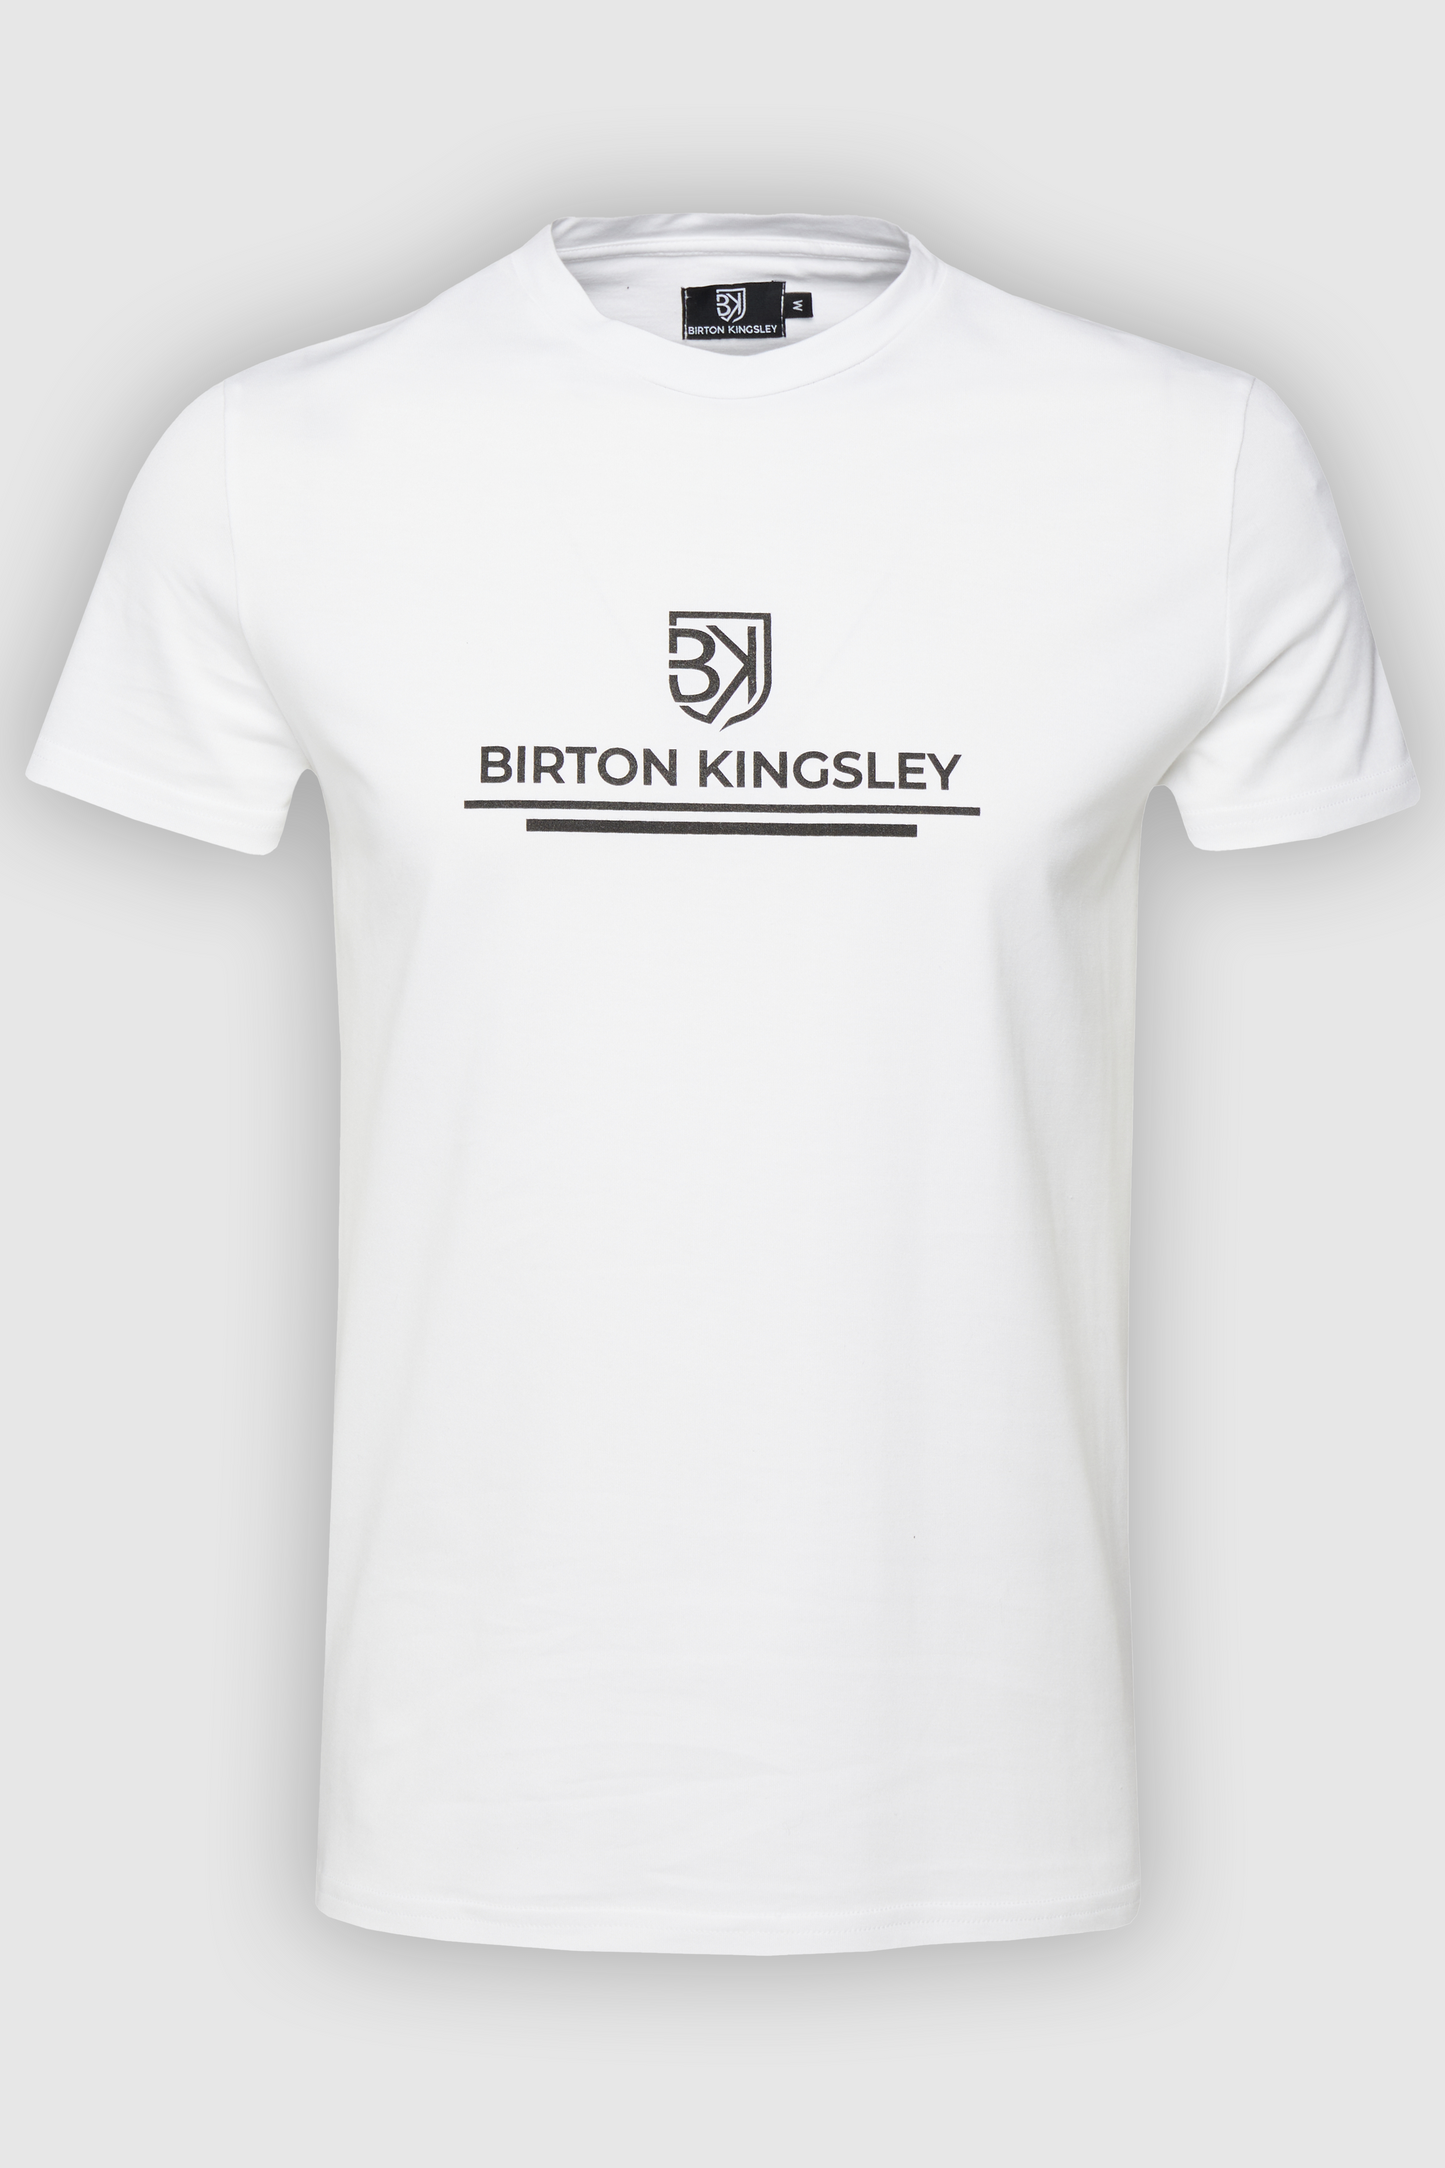 Exeter - Premium T-Shirt Pearl White made of 100% Supima cotton